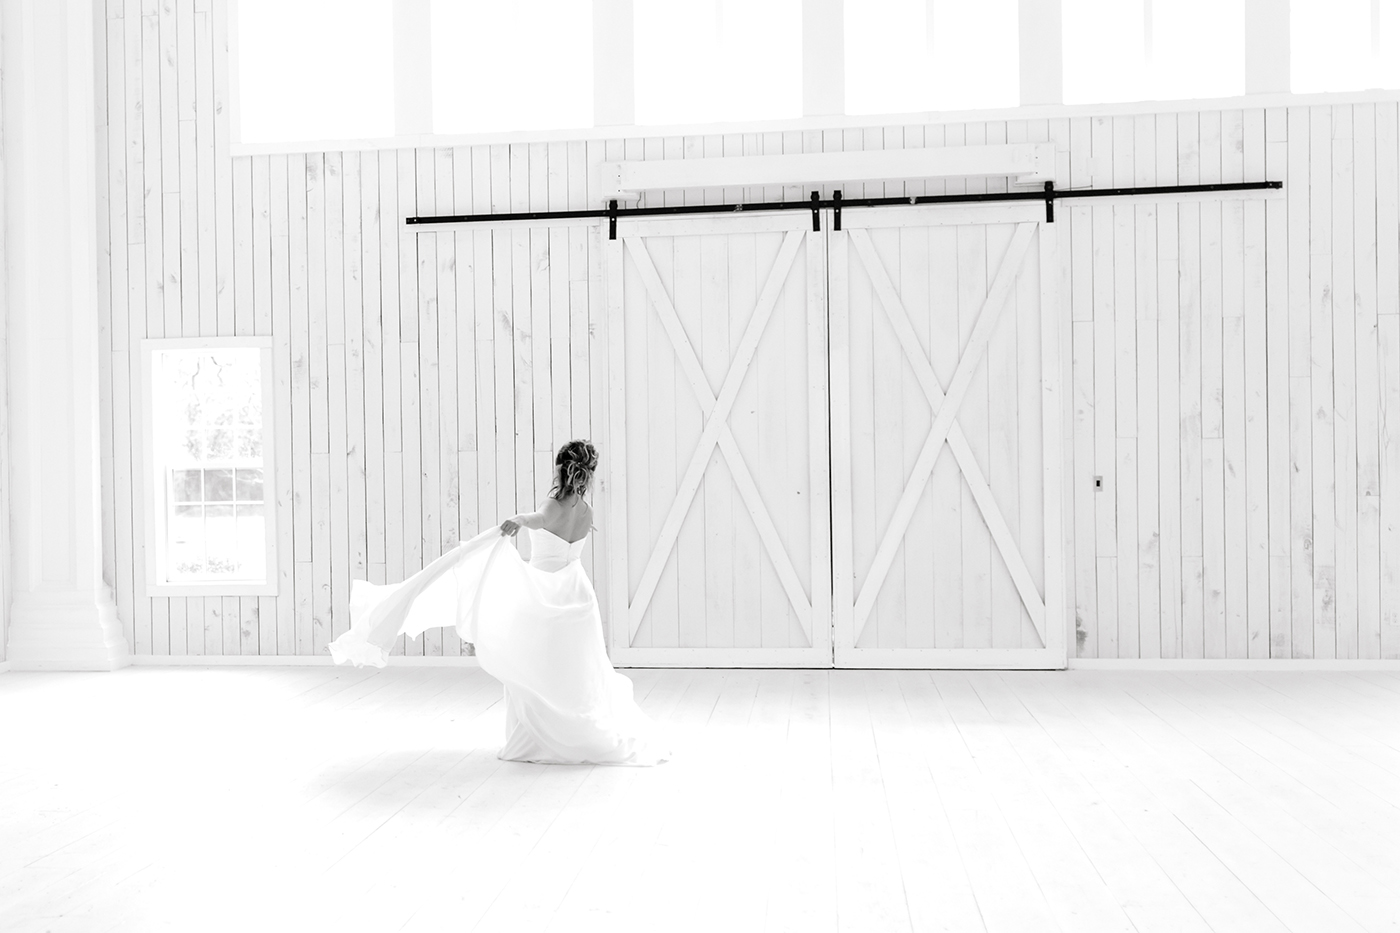 Ballet Wedding Inspiration | The White Sparrow | Laylee Emadi Photography